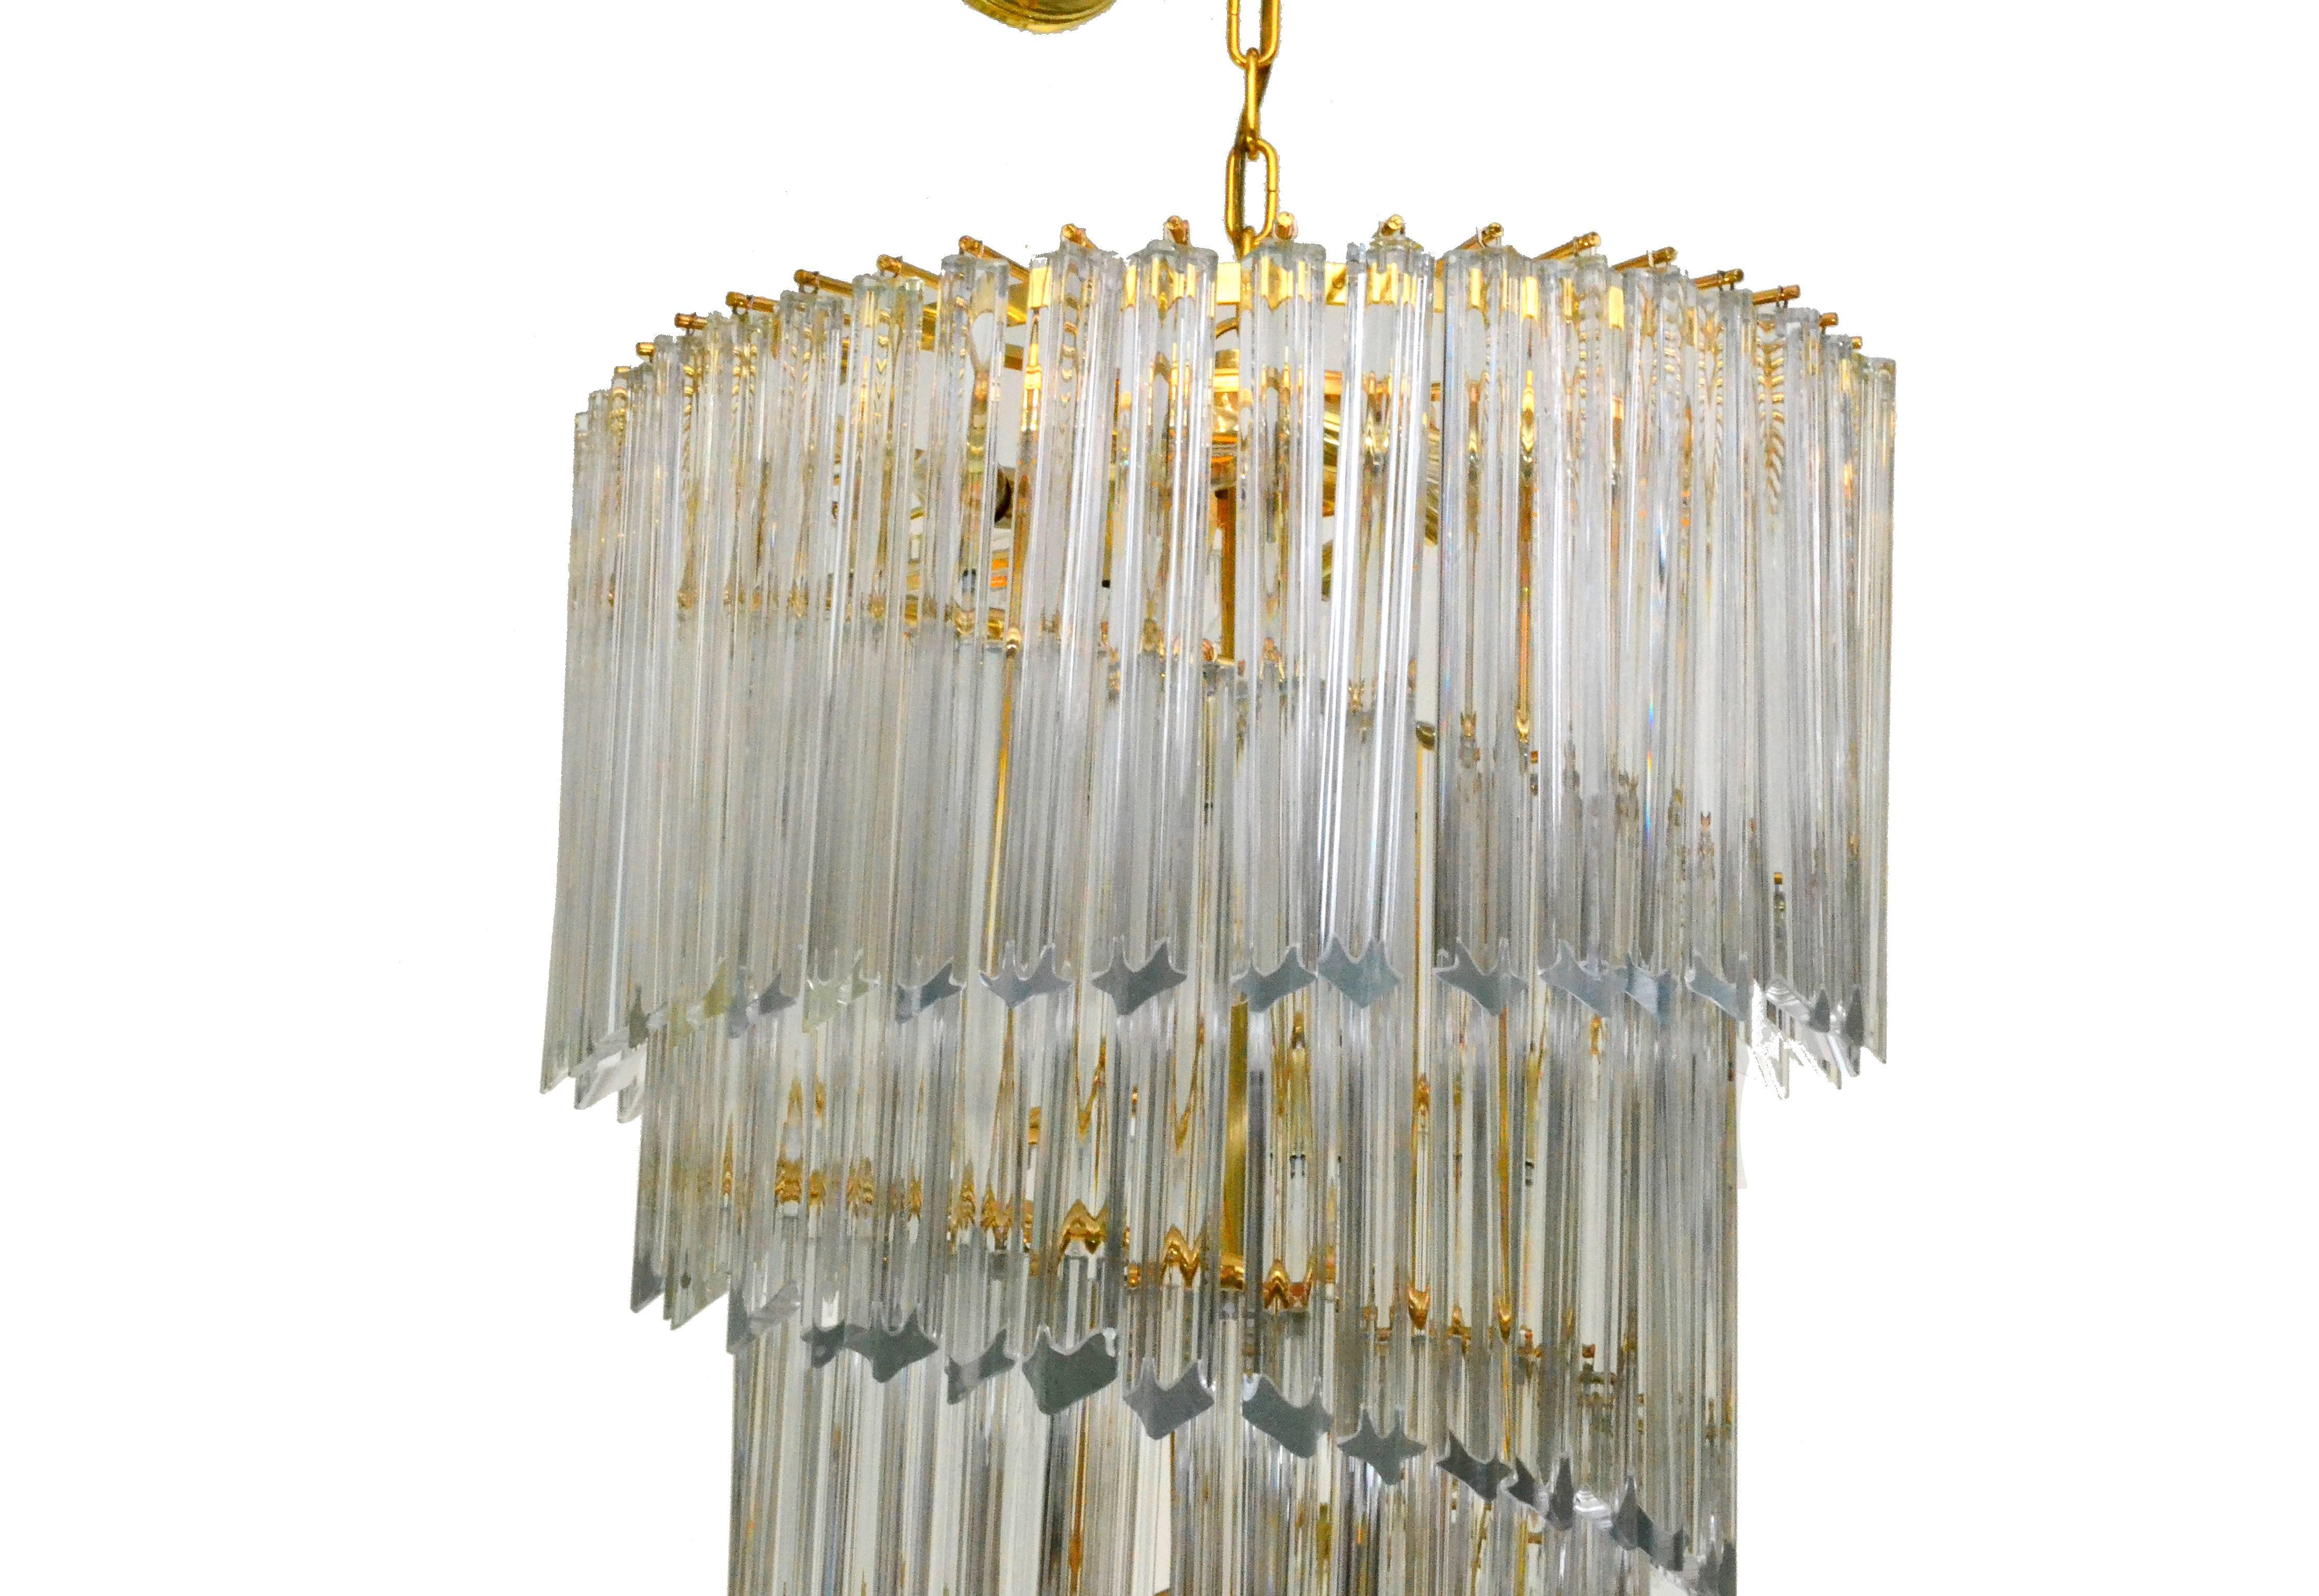 Seven-tier Venini quatro punta prism chandelier. Heavy leaded Murano crystal prisms haning on a brass frame.
Twelve lights make this fine Venini chandelier stand out.